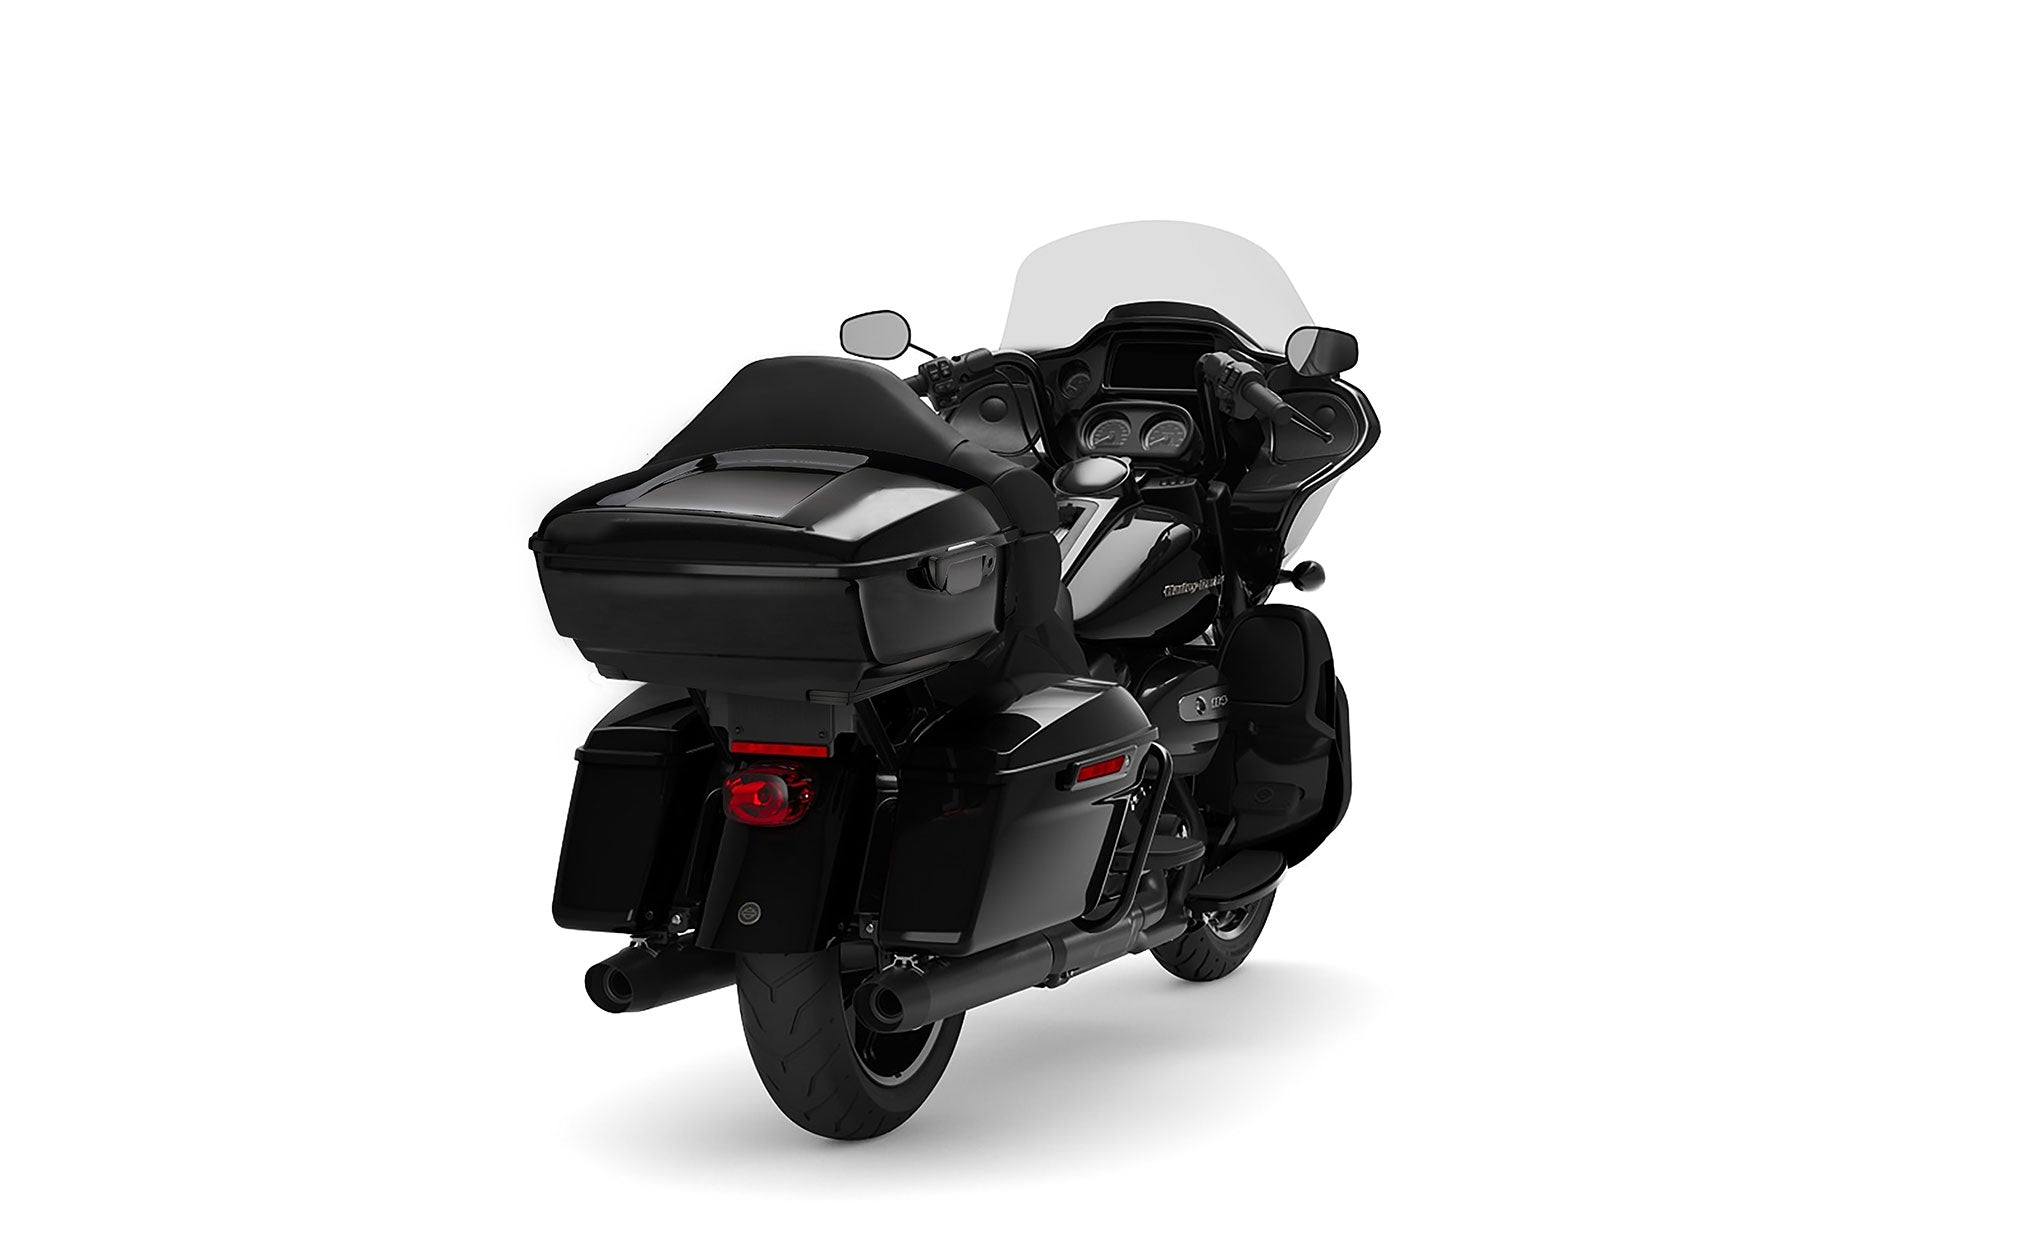 Harley Touring Tour Packs - Best Motorcycle Tour Packs for Touring